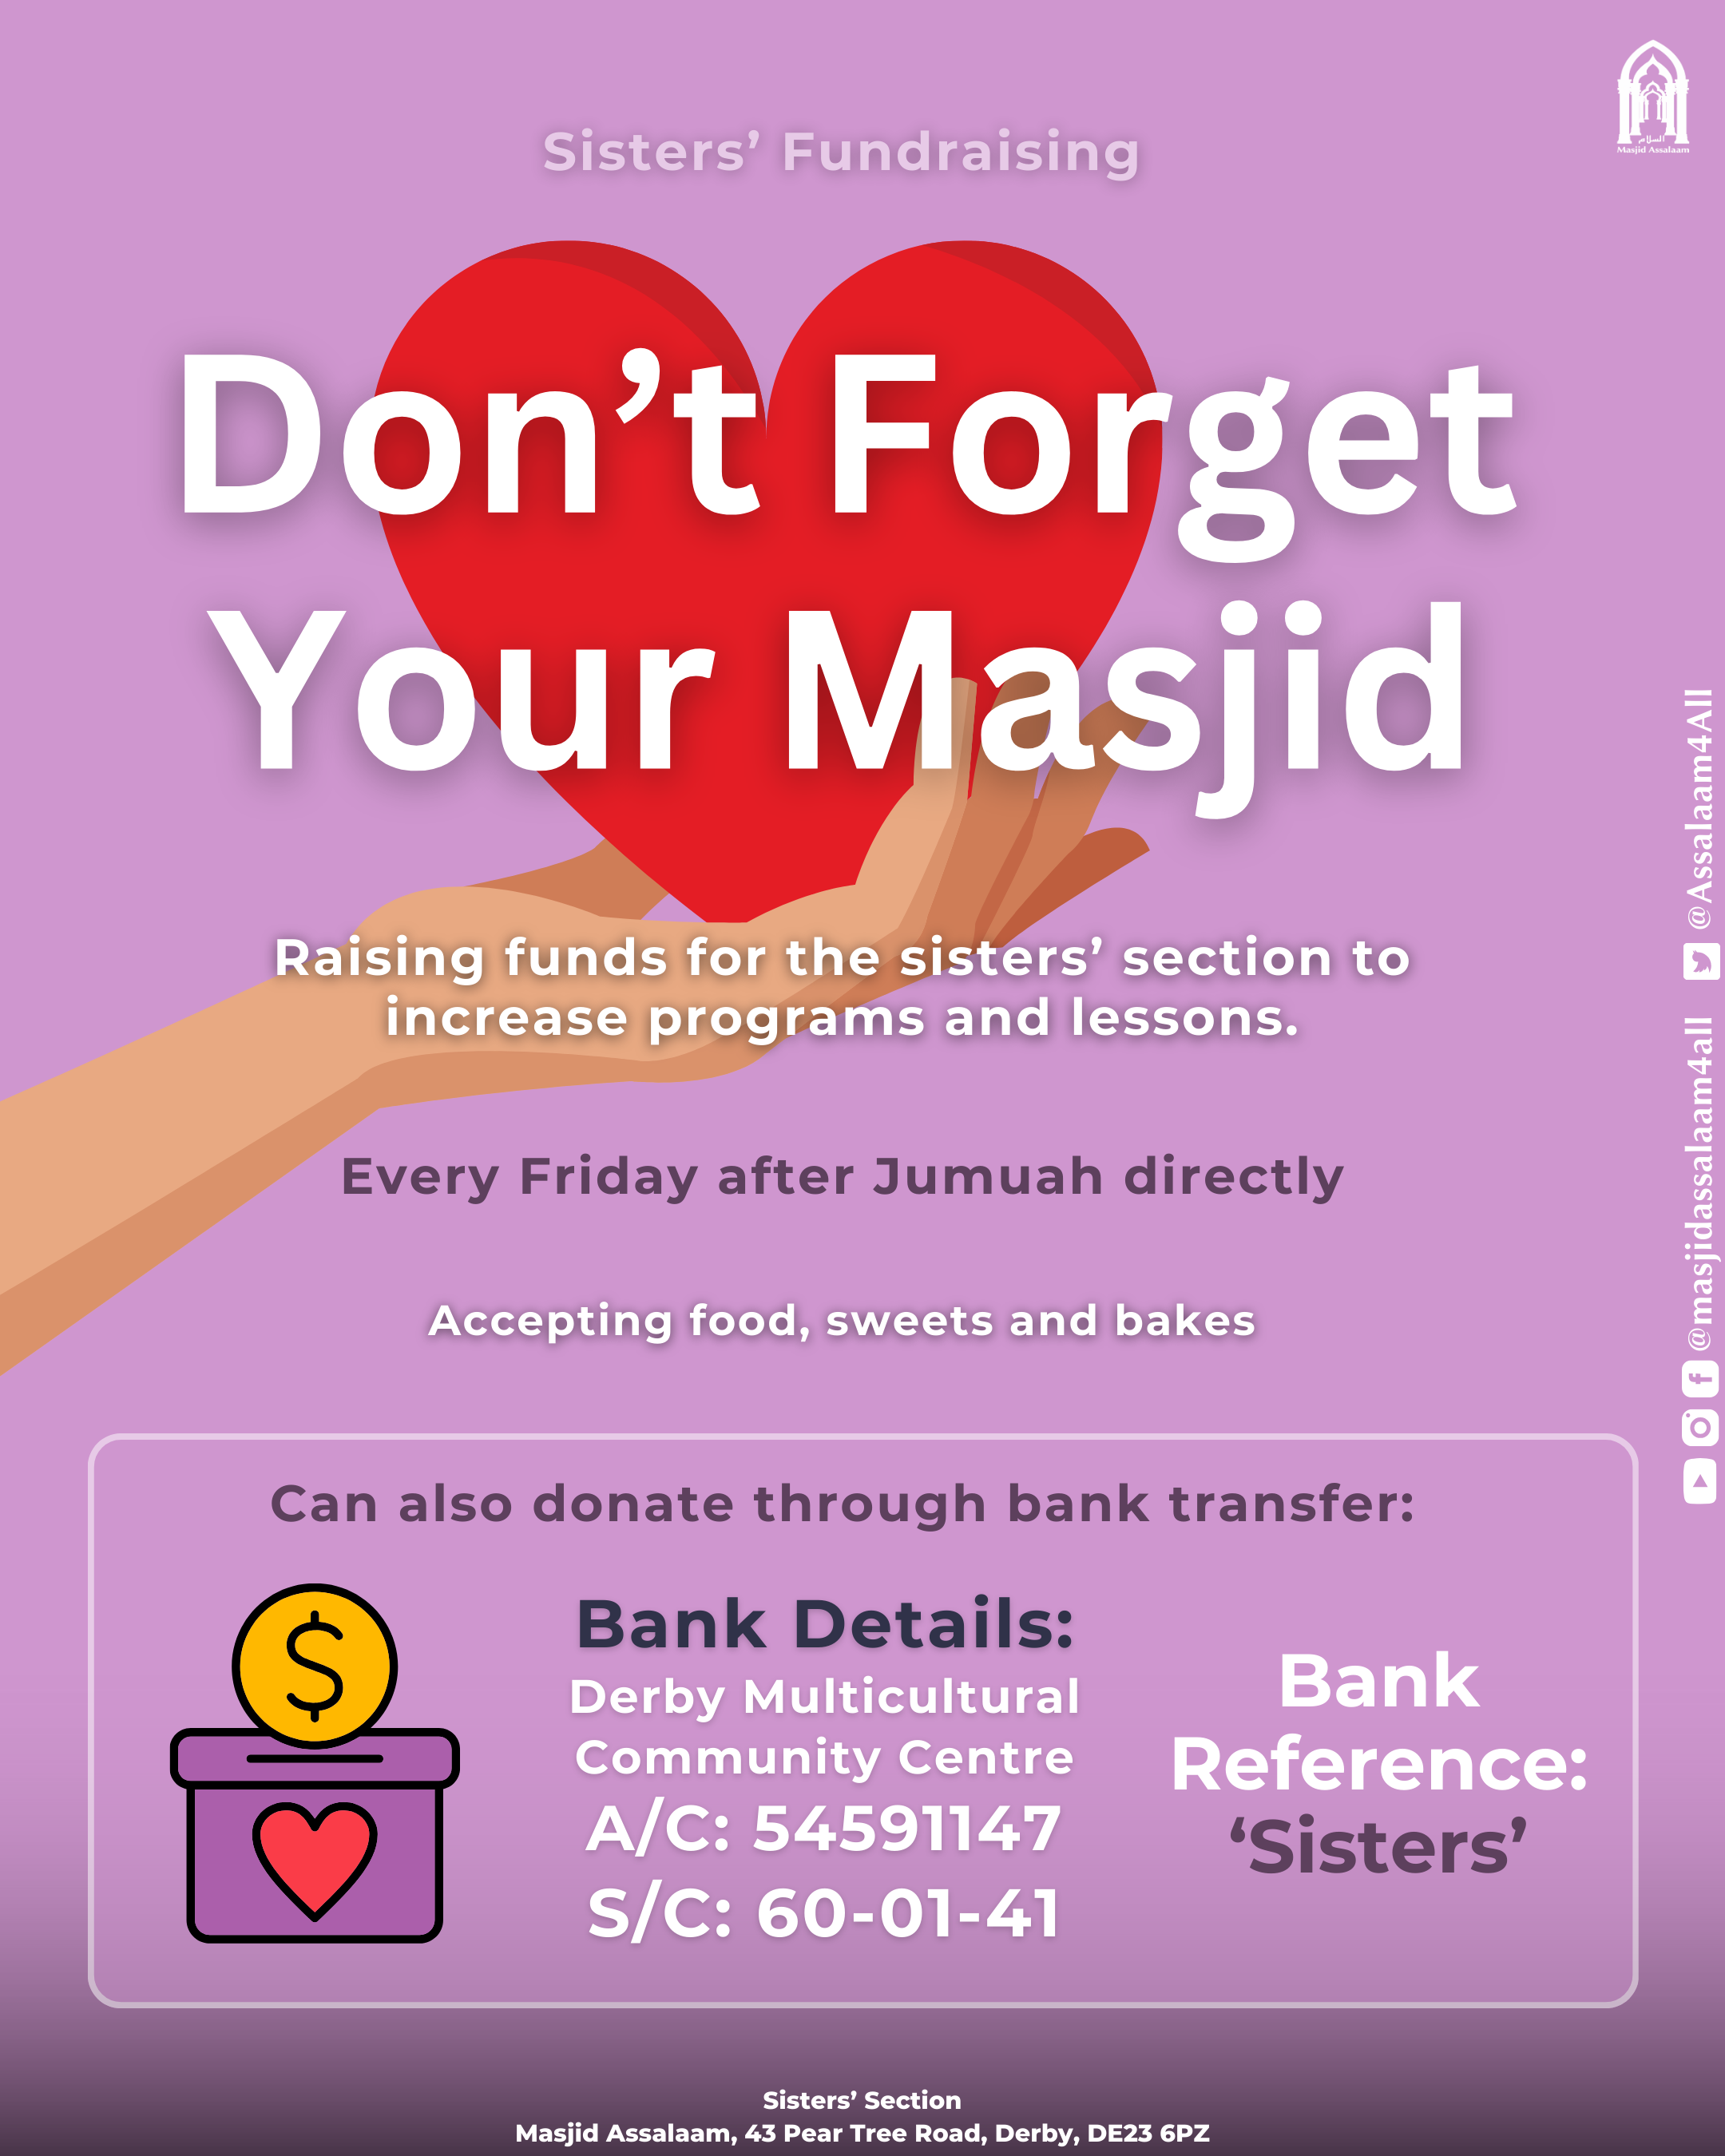 Sisters' Fundraising - Don't Forget Your Masjid